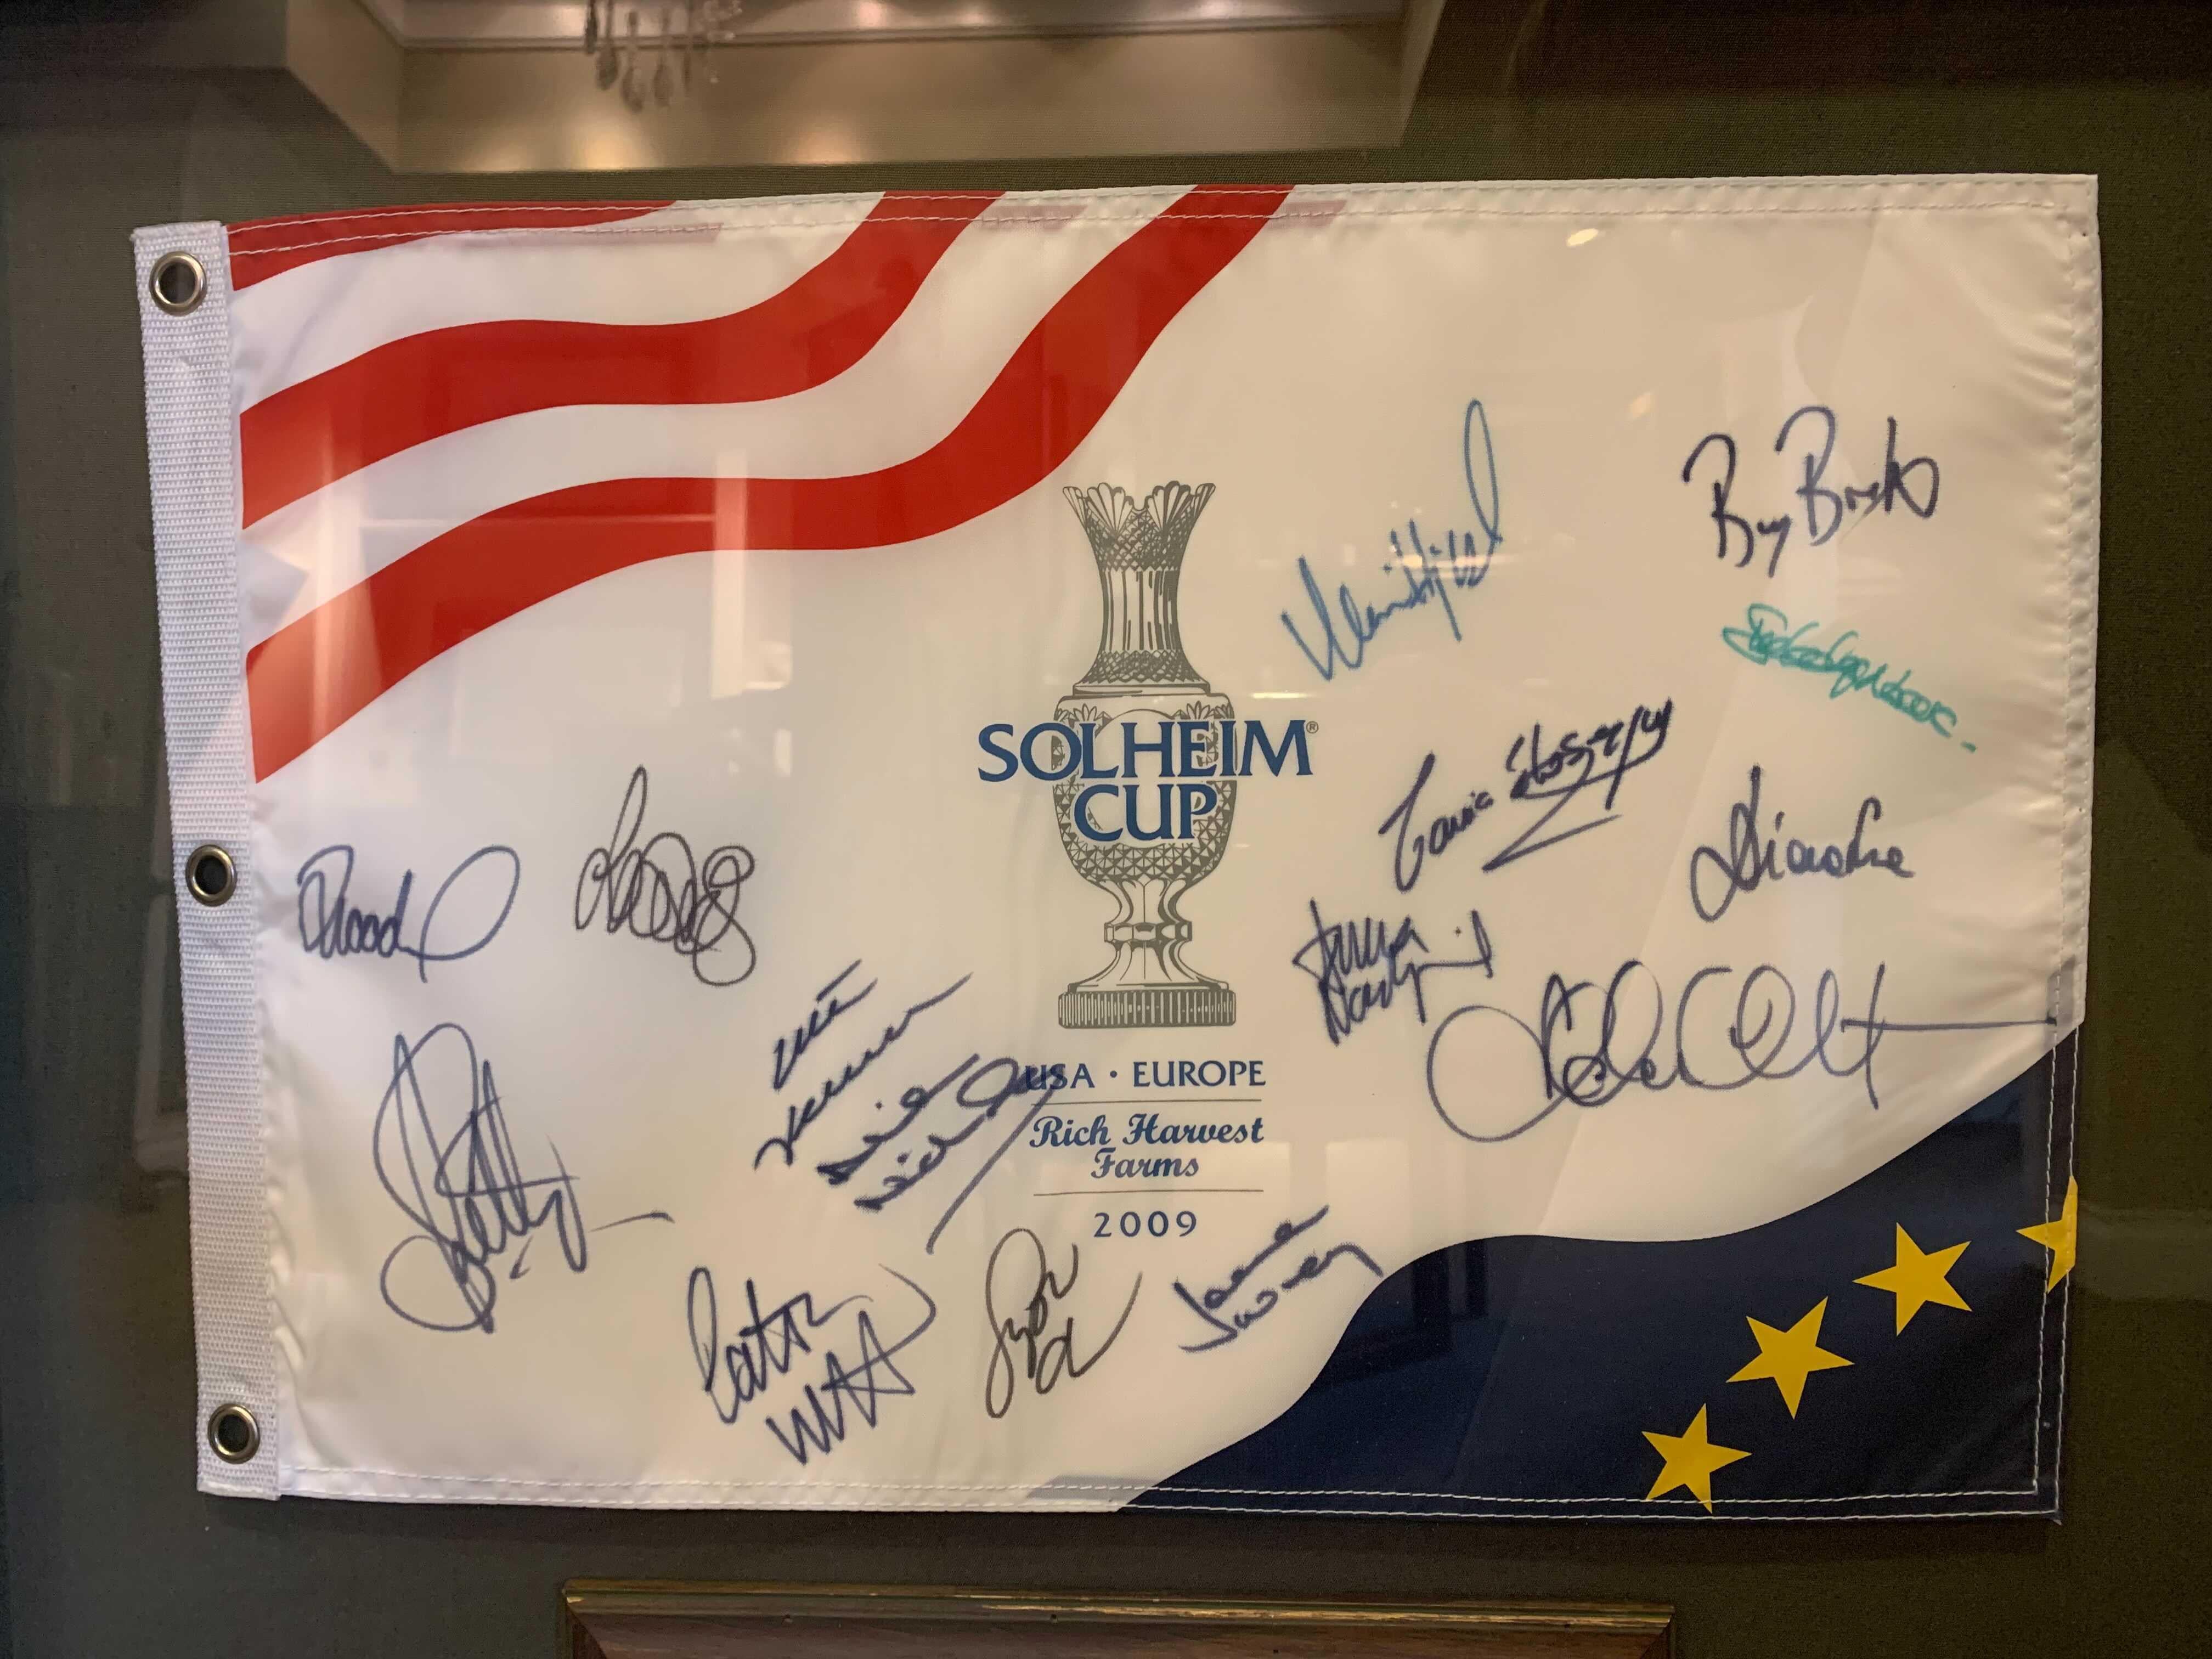 Solheim Cup Matches U.S. & European Team Signed Photo & Flag, USA 16 vs. EUROPE 12, Circa 2009

Presented is an autographed collage celebrating the women golfers of the 2009 Solheim Cup U.S. and European teams. The 11th Solheim Cup Matches were